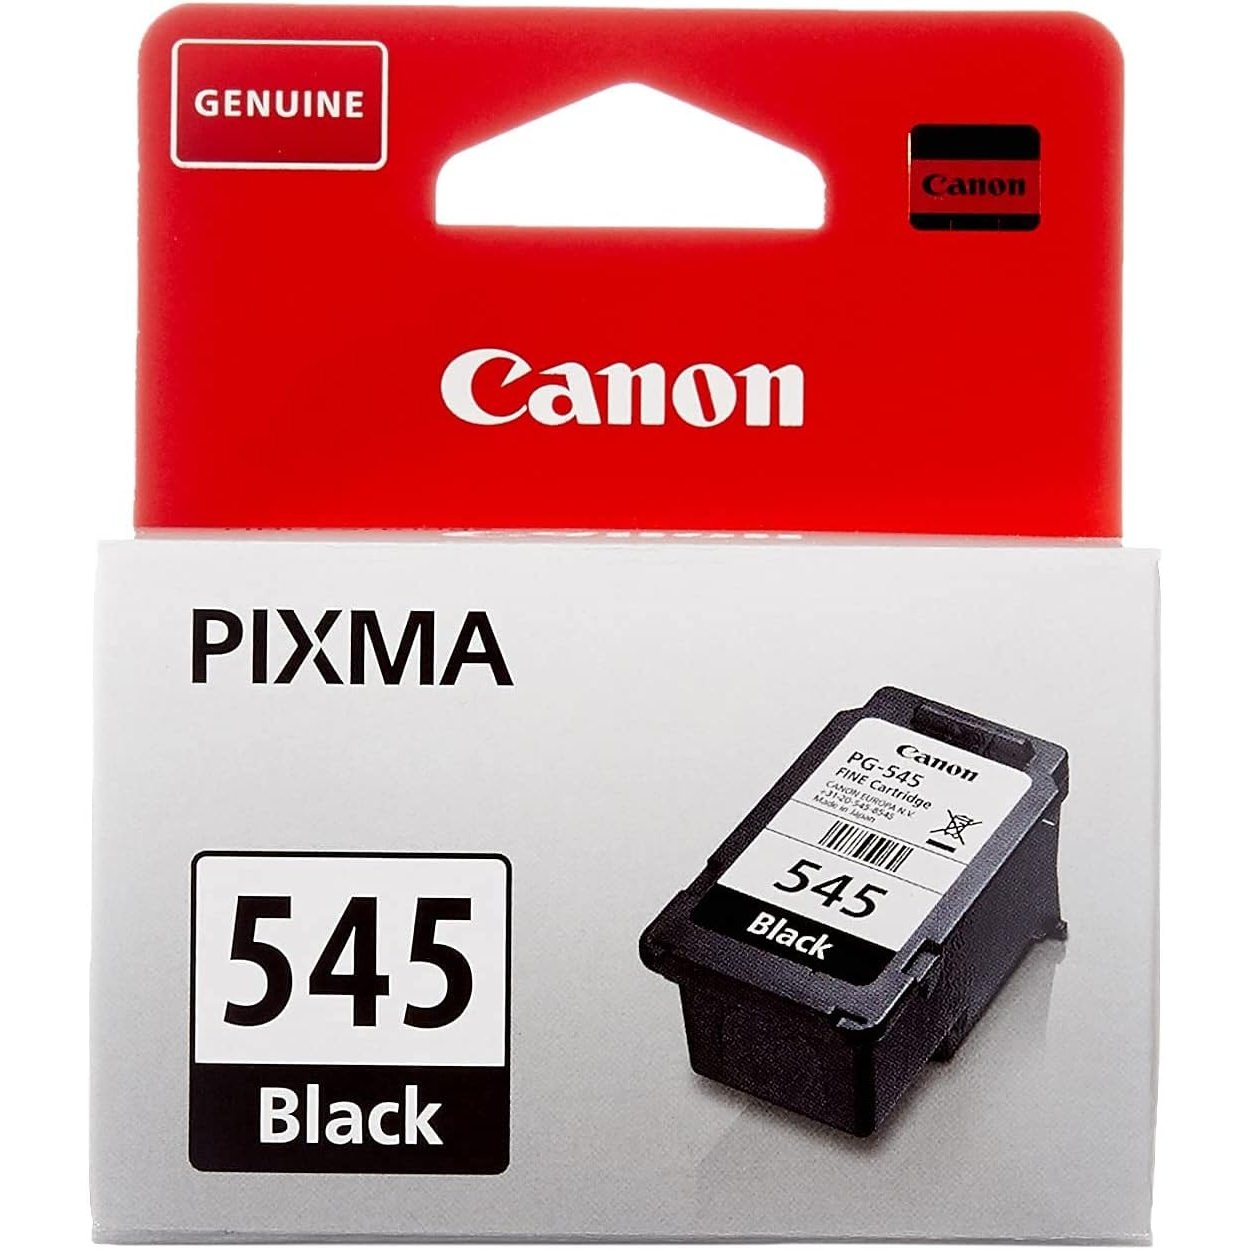 CANON PIXMA TS3350 PRINTER HOW TO SCAN YOUR DOCUMENT ON MOBILE DEVICE,  SHARE TO EMAIL & PRINT 